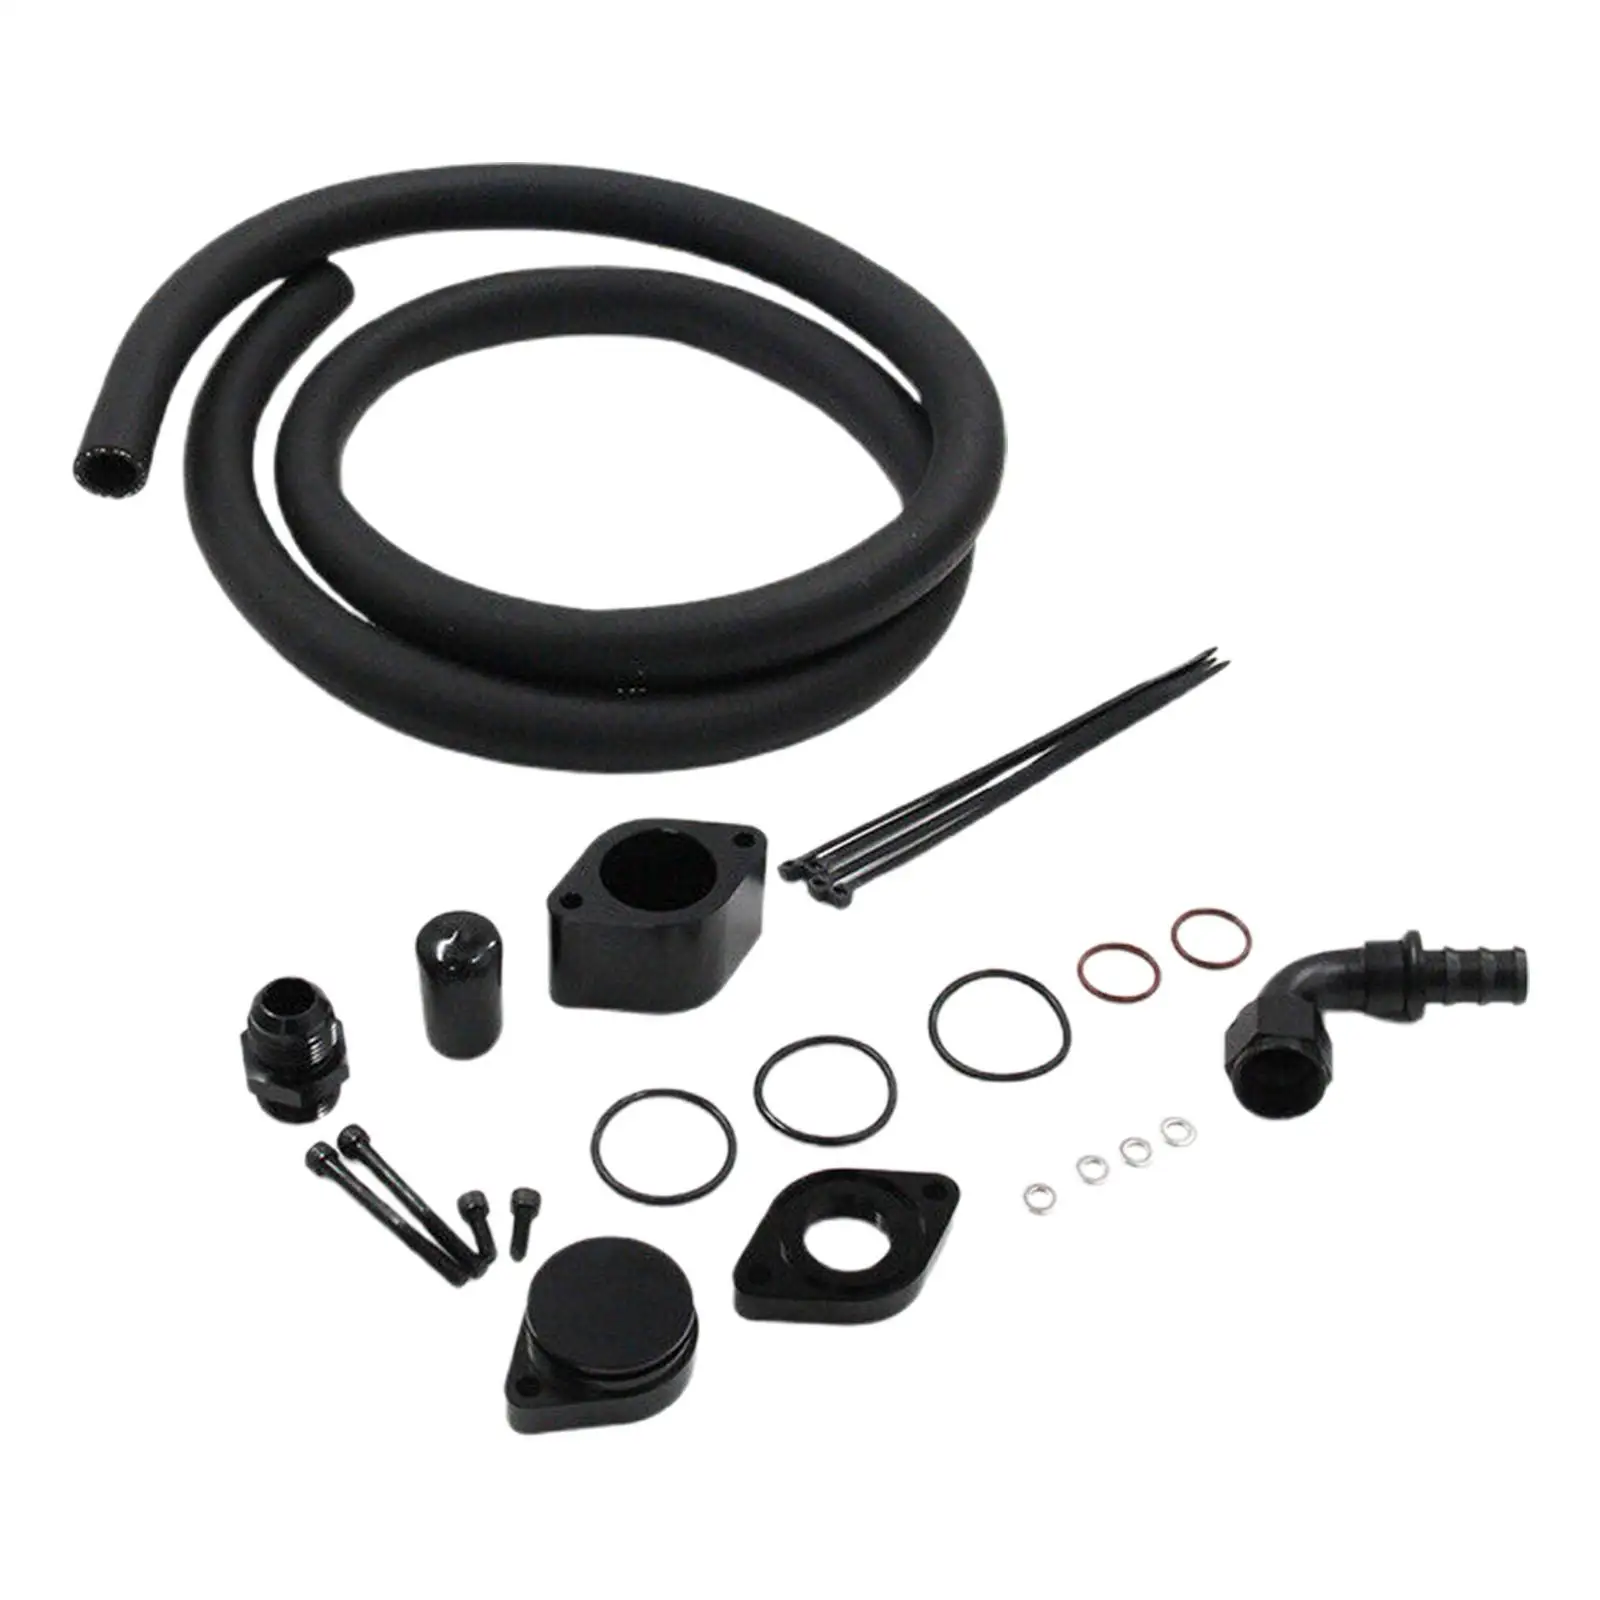 Pcv Reroute Engine Ventilation Kit Durable for Ford 11-20 6.7L Powerstroke Diesel F-250 F-450 F-350 Accessory